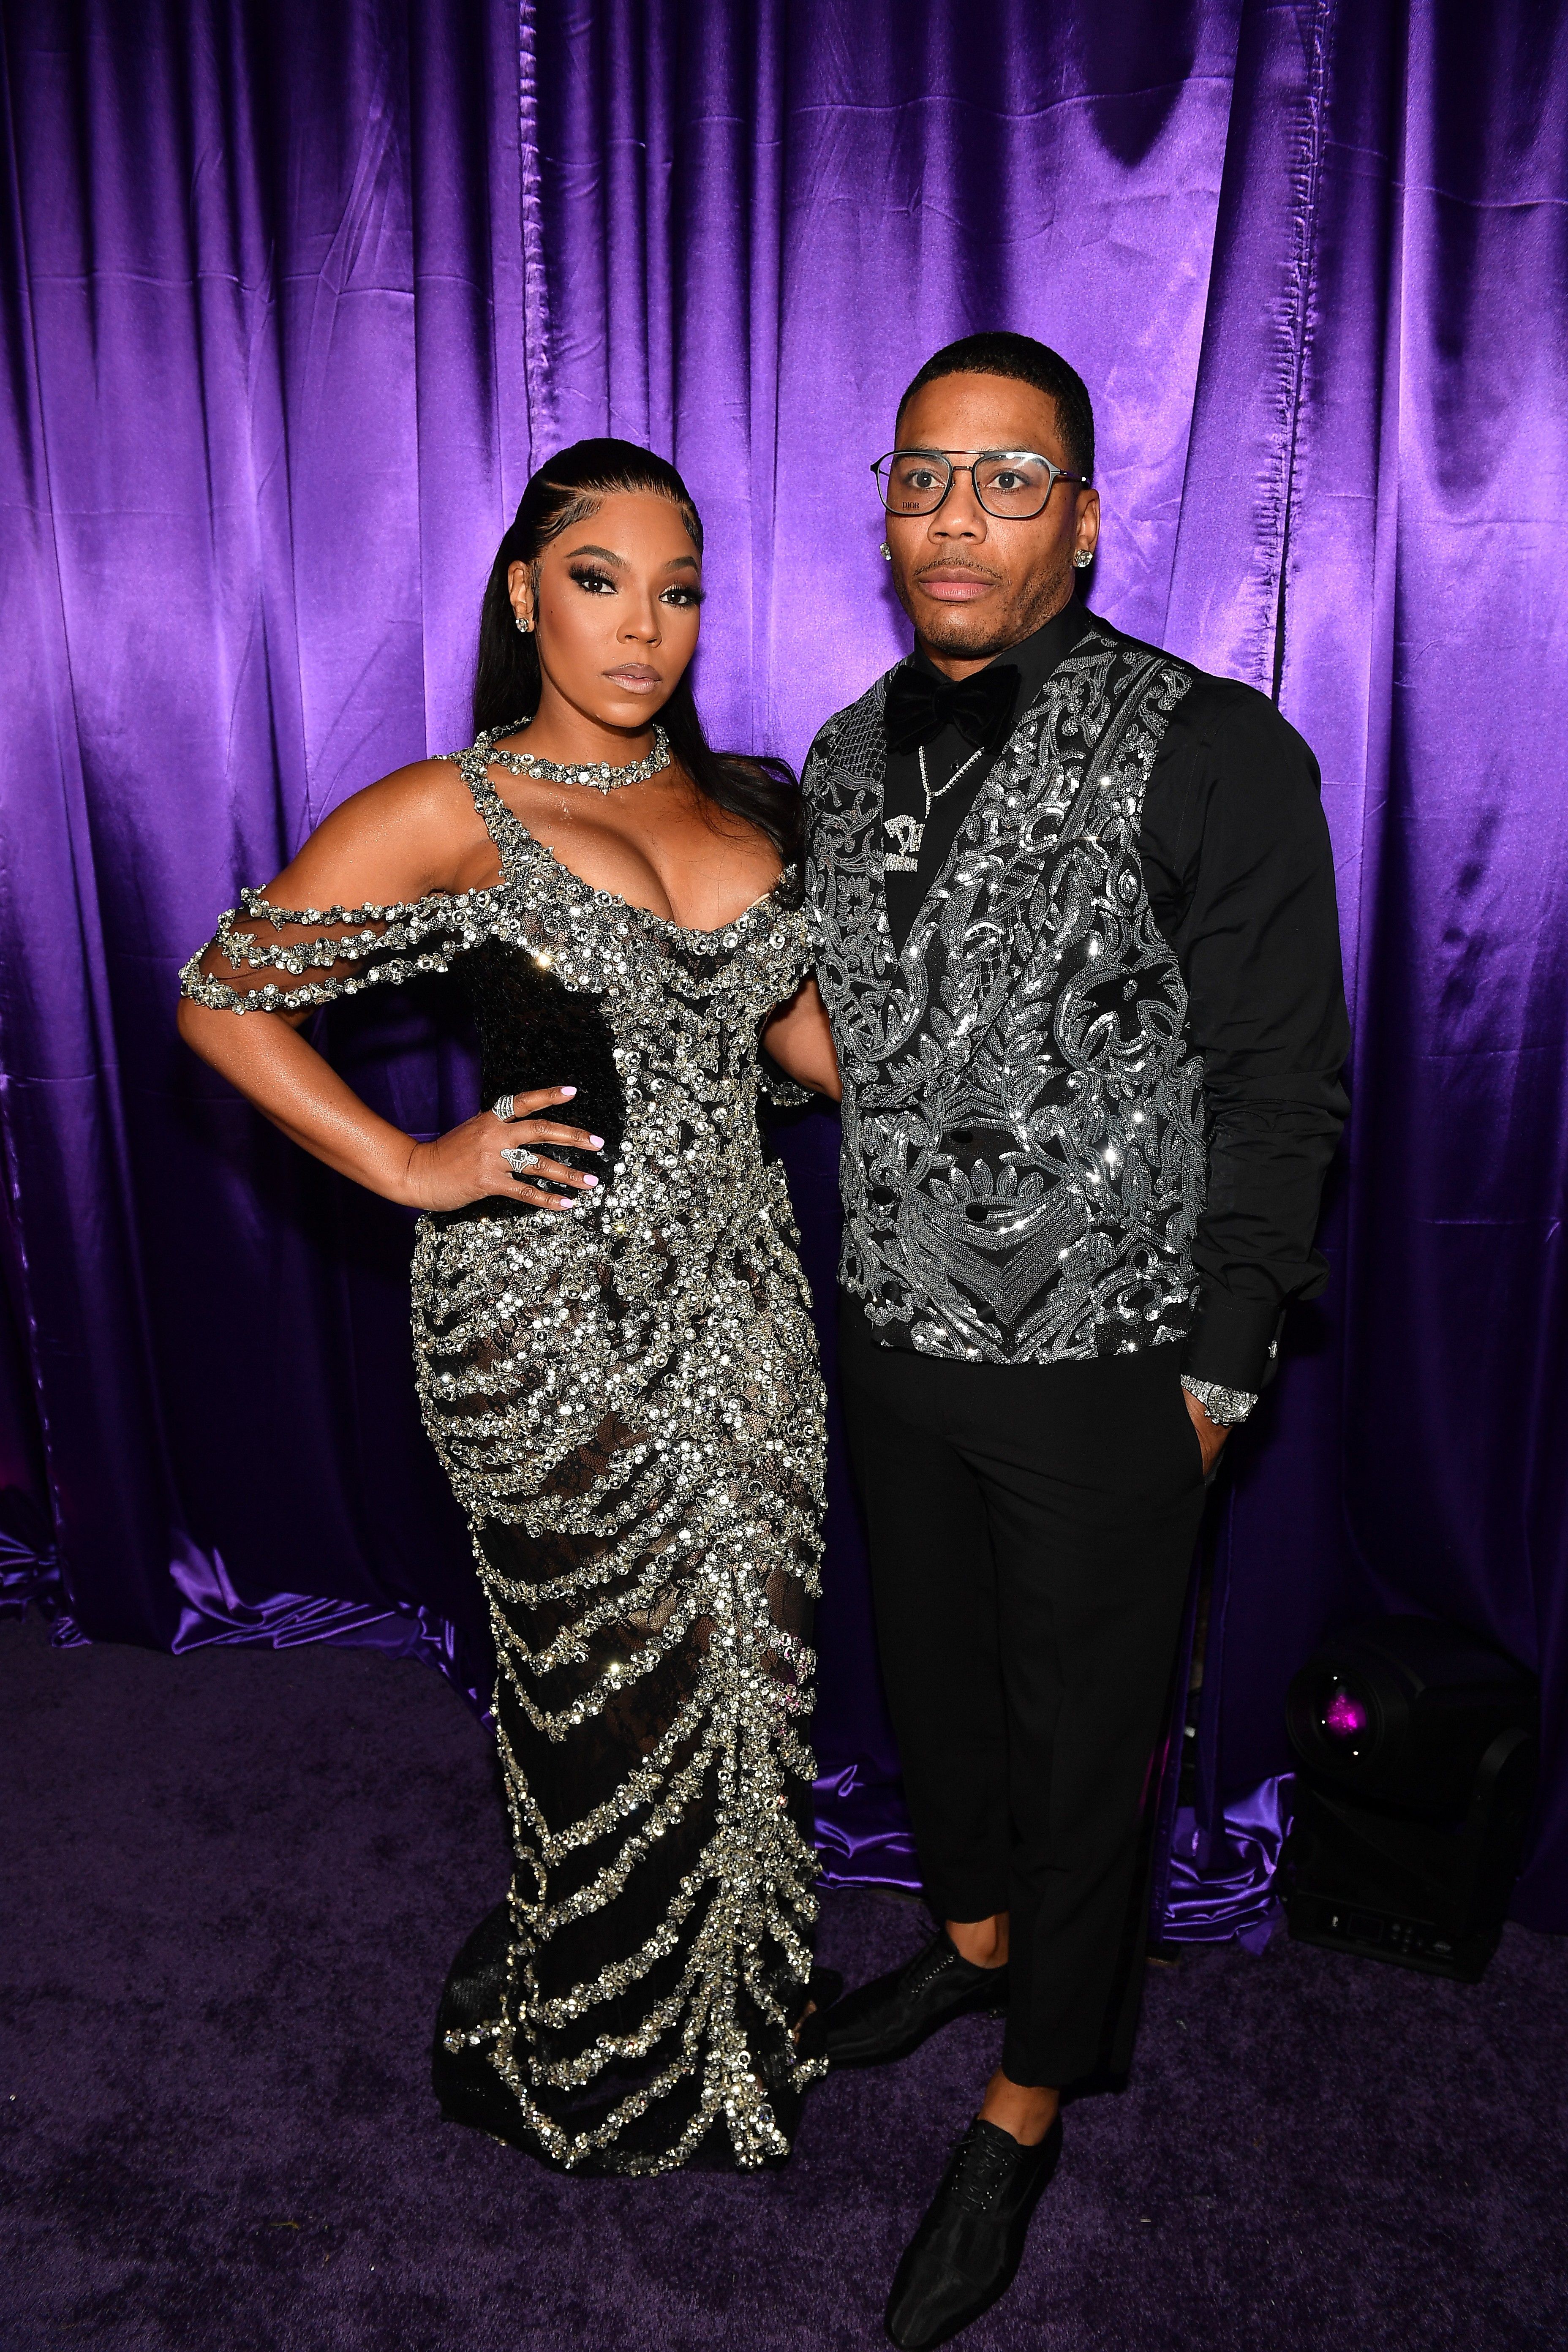 Nelly and Ashanti Perform Together